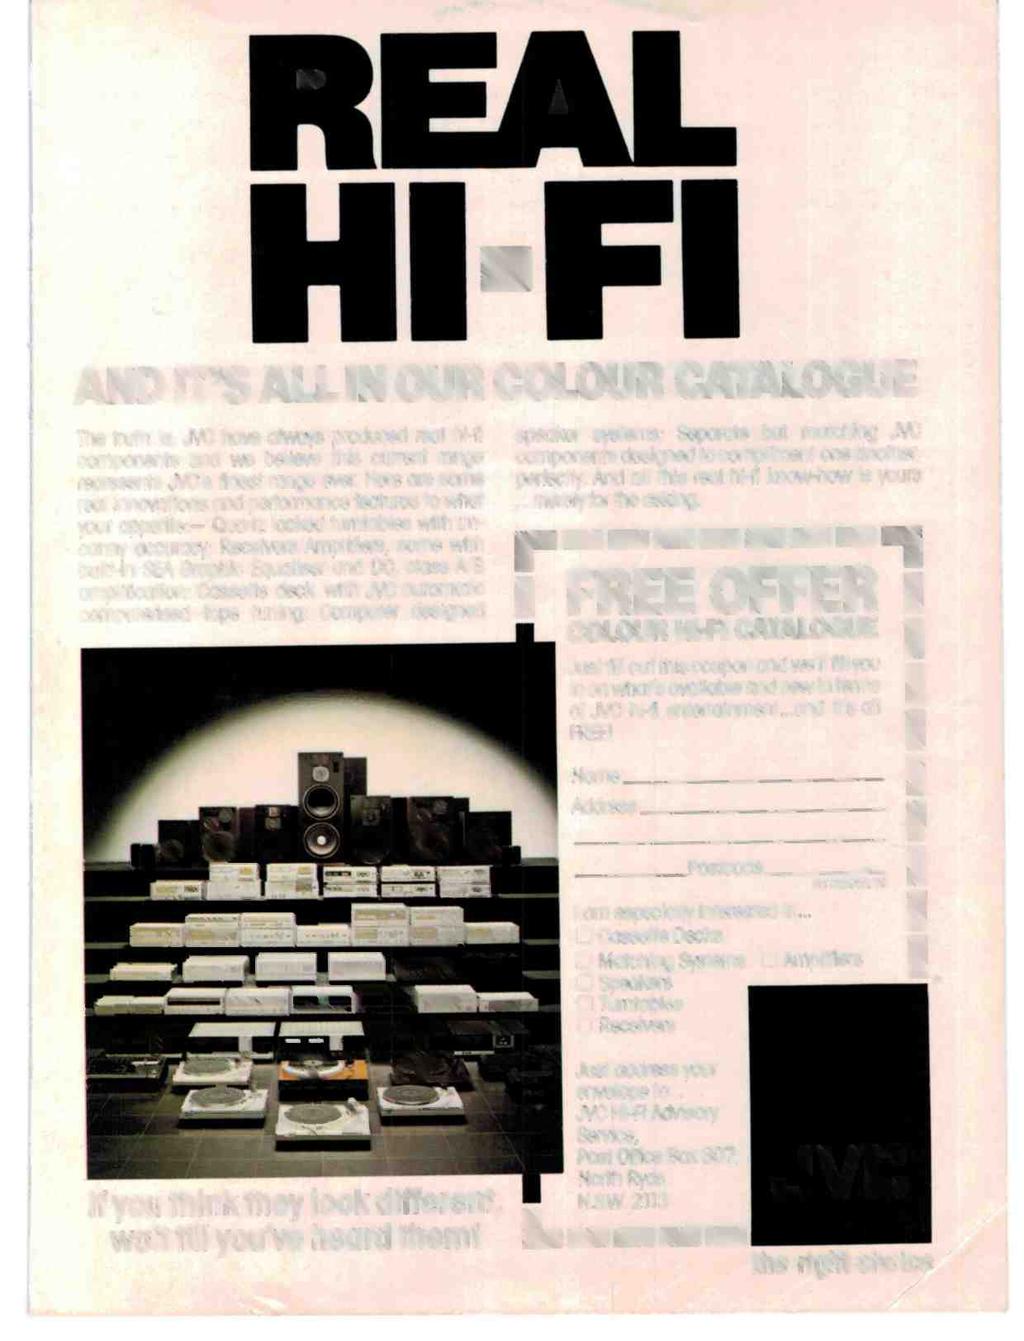 AND IT'S ALL IN OUR COLOUR CATALOGUE The truth is, JVC have always produced real hi-fi components and we believe this current range represents JVC's finest range ever.